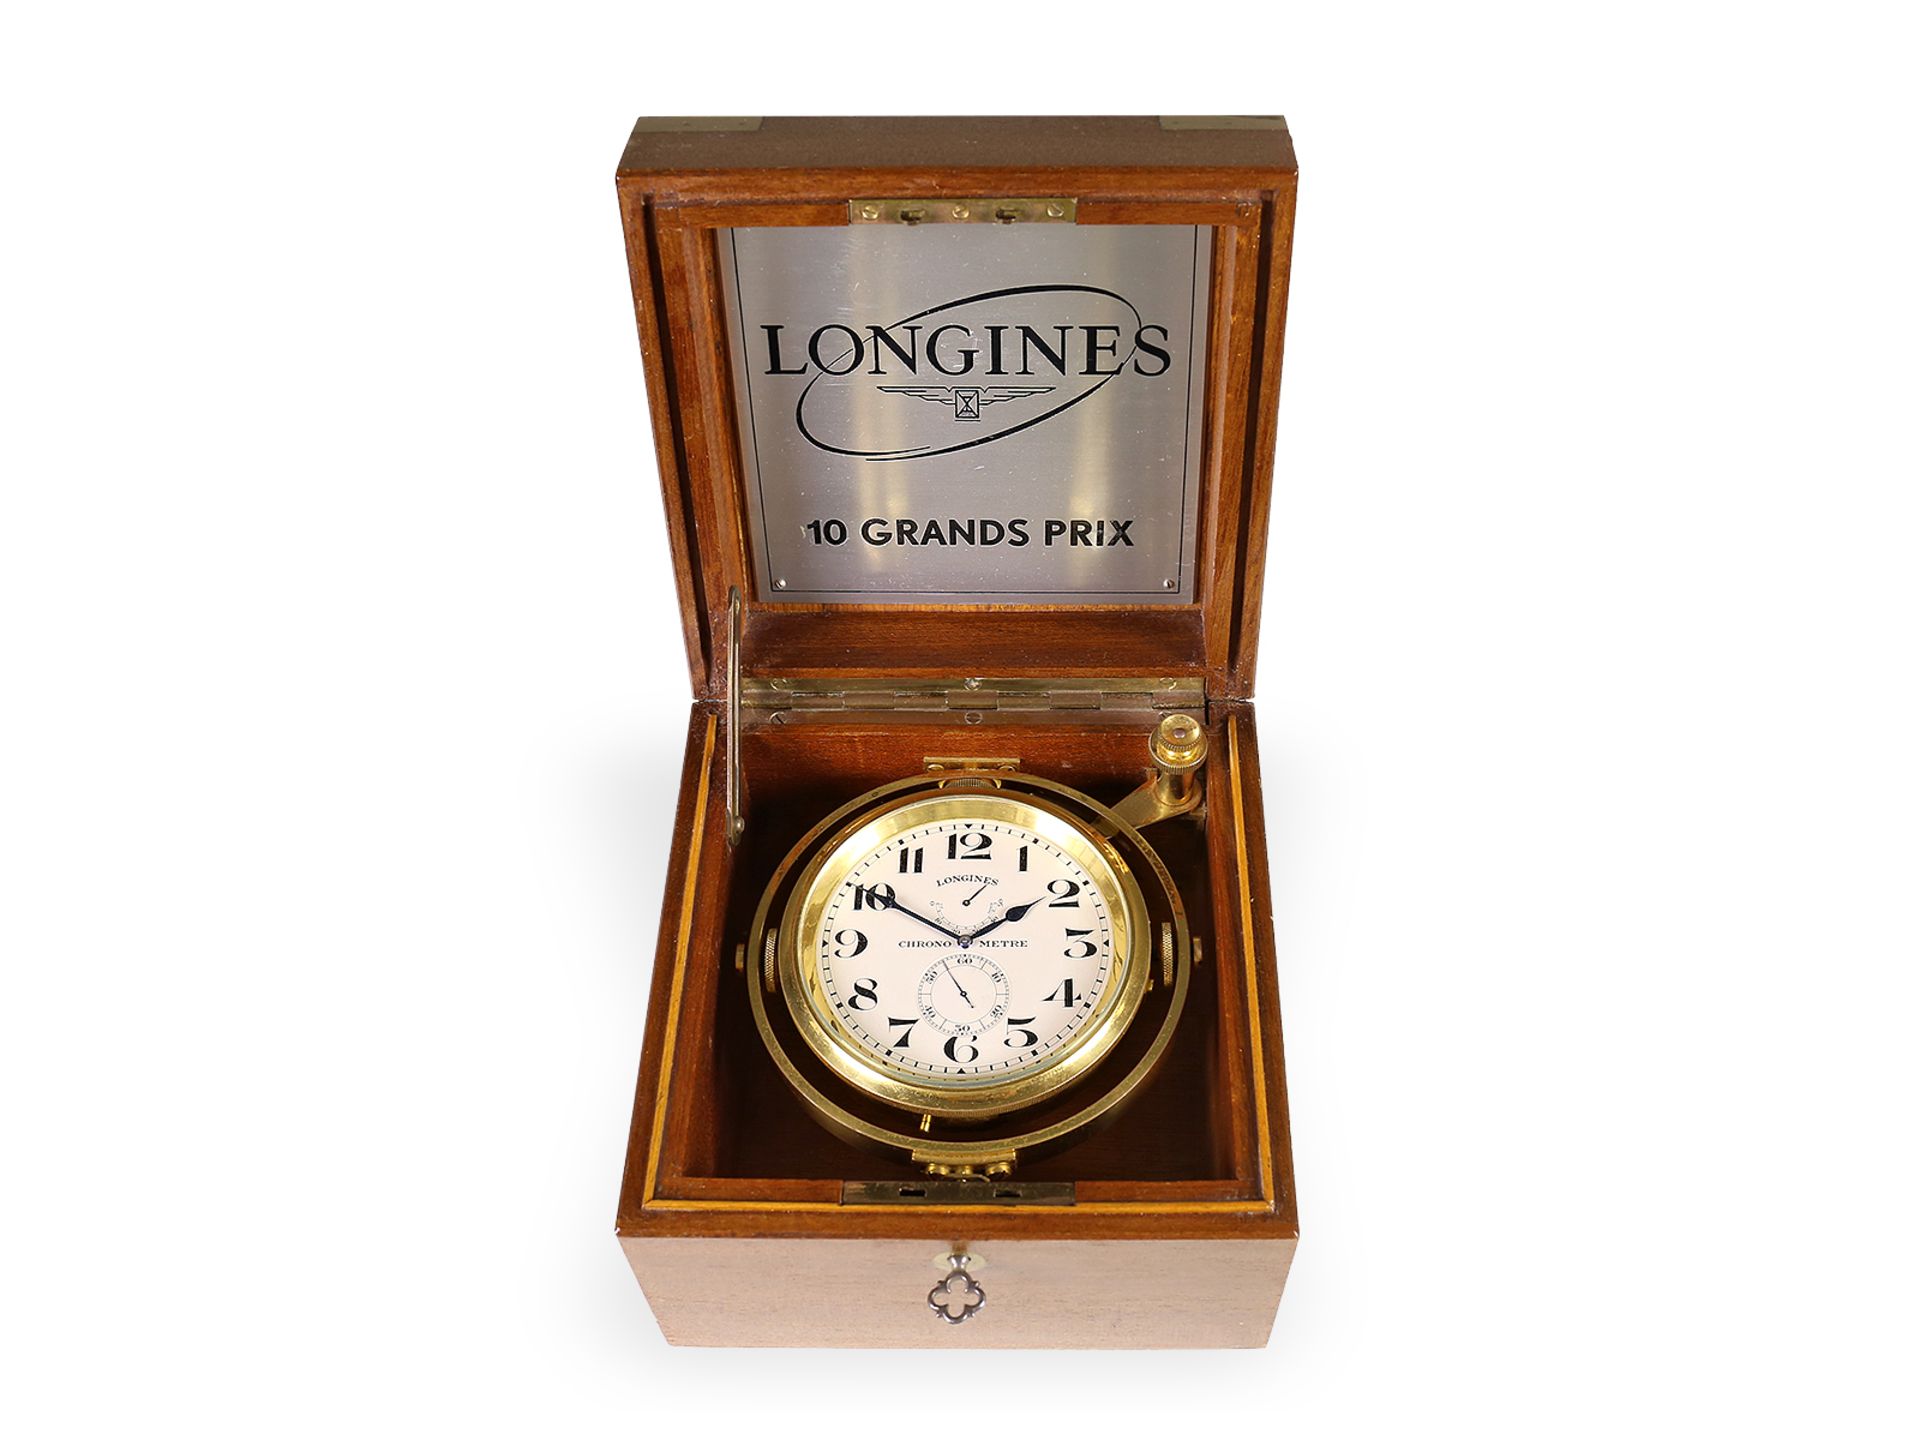 Very small, rare Longines marine chronometer in excellent condition, ca. 1950